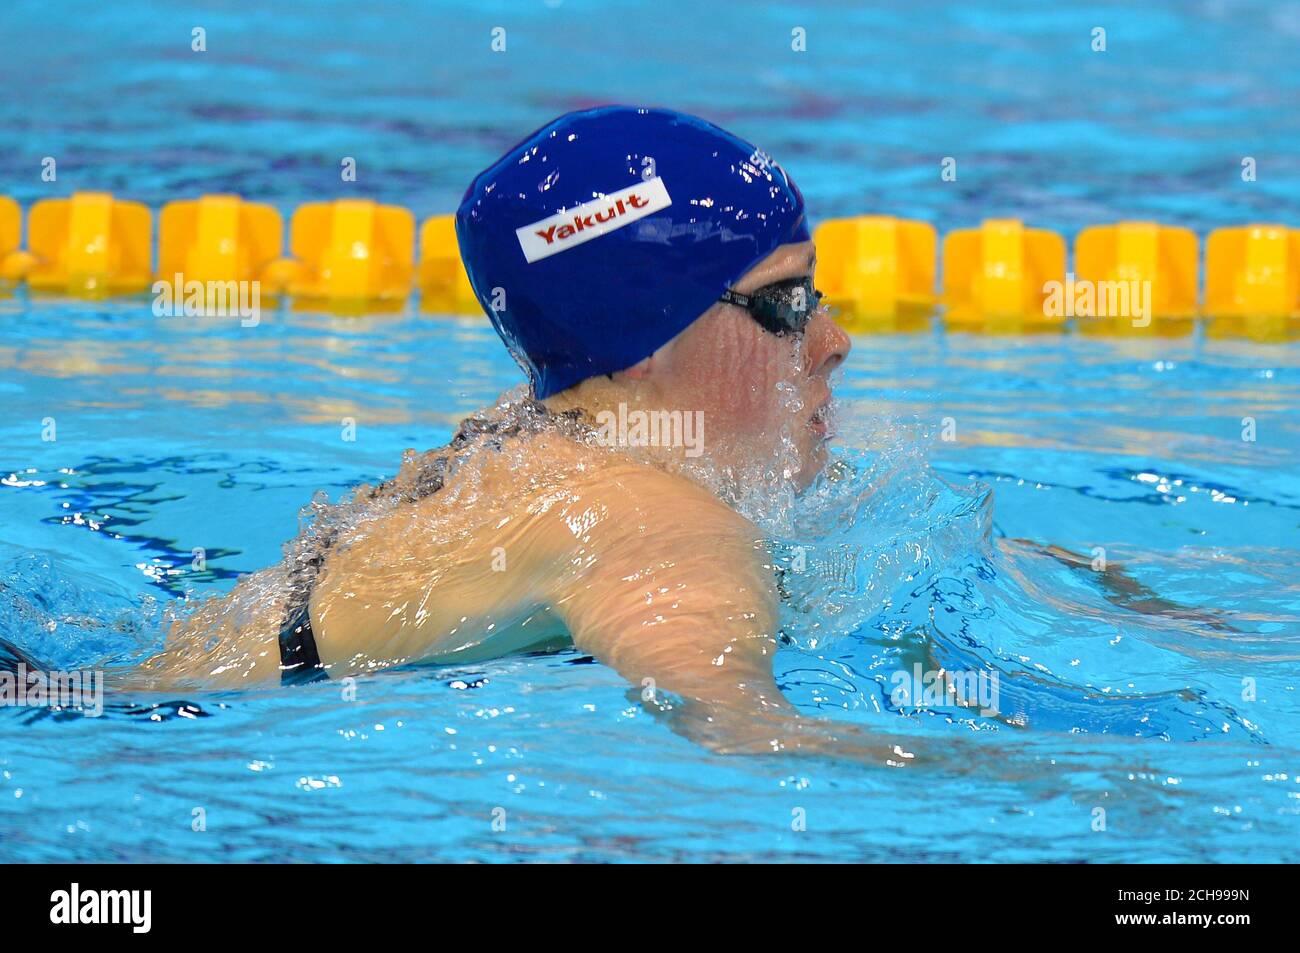 Great Britain's Siobhan-Marie O'Connor competes in her Women's 200m Medley Semi-Final during day ten of the European Aquatics Championships at the London Aquatics Centre, Stratford. Stock Photo